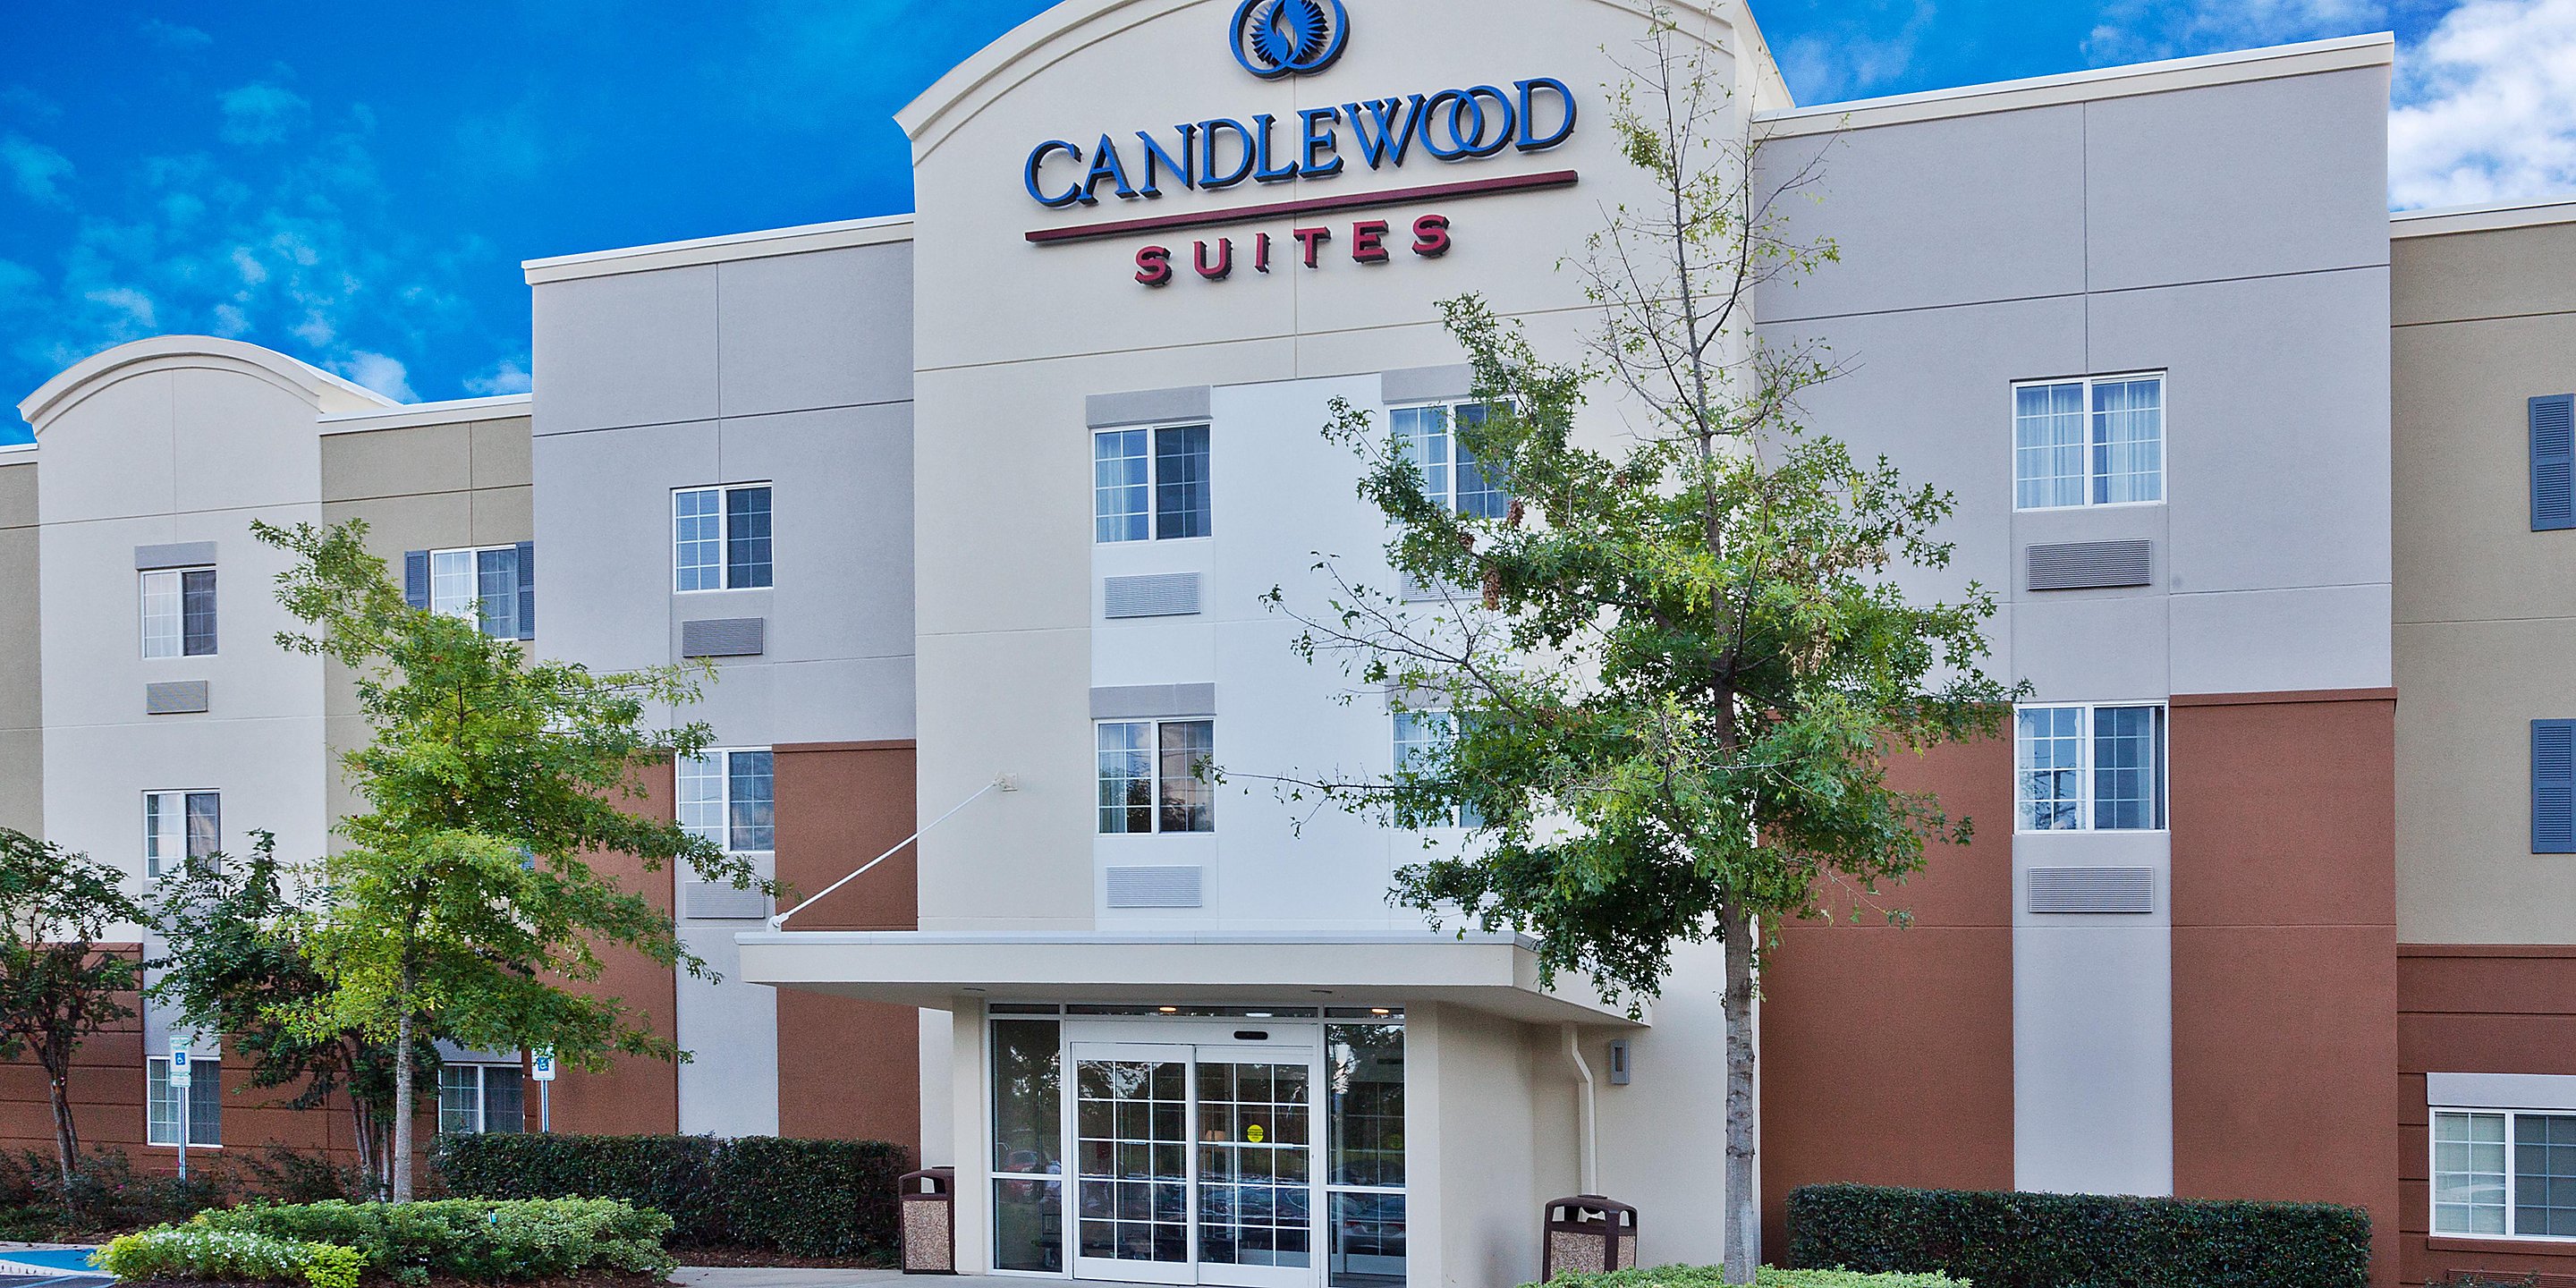 Exterior view of Candlewood Suites